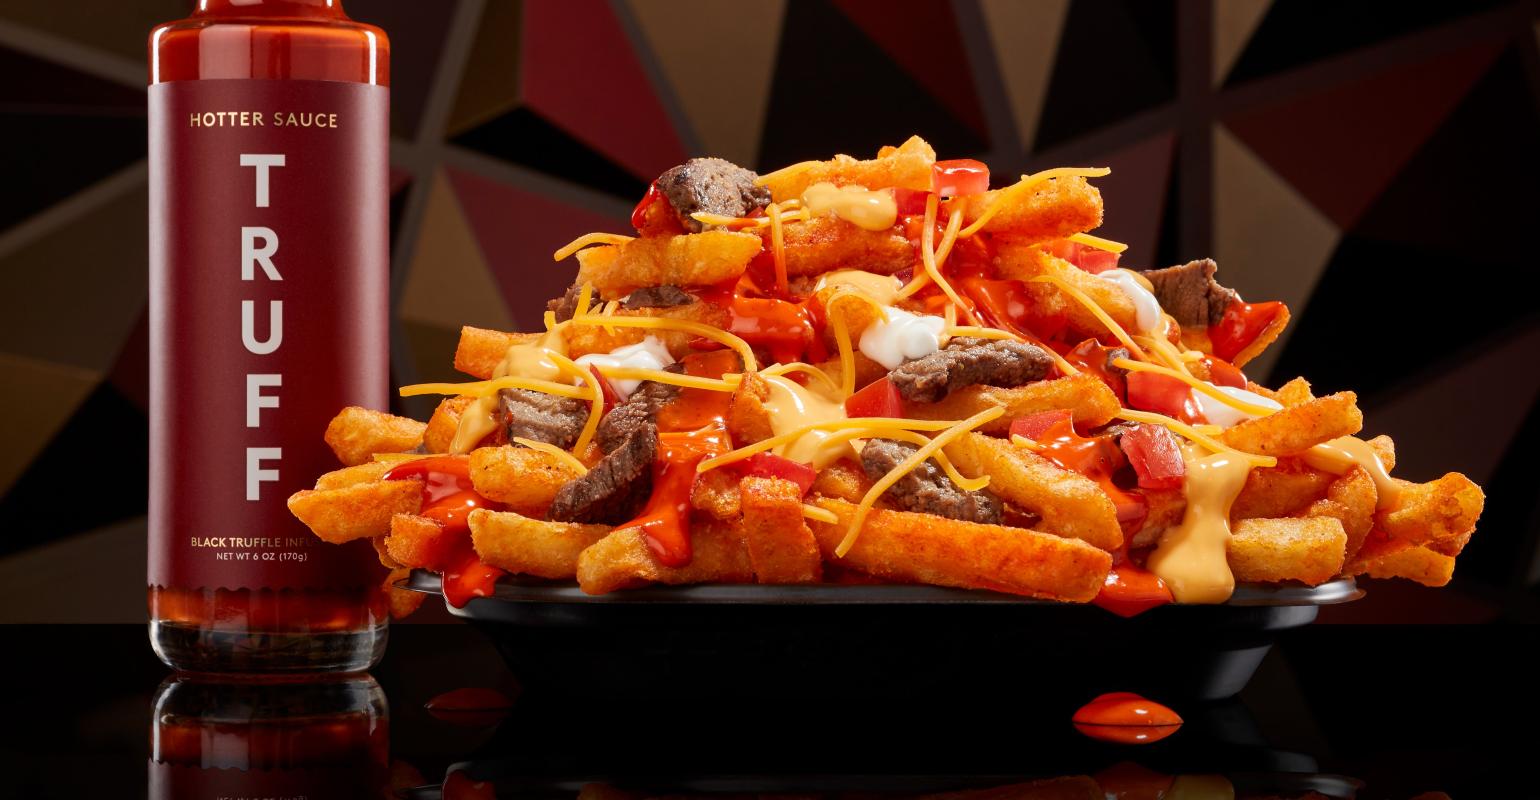 Taco Bell’s Nacho Fries return to menus with an added kick Nation's